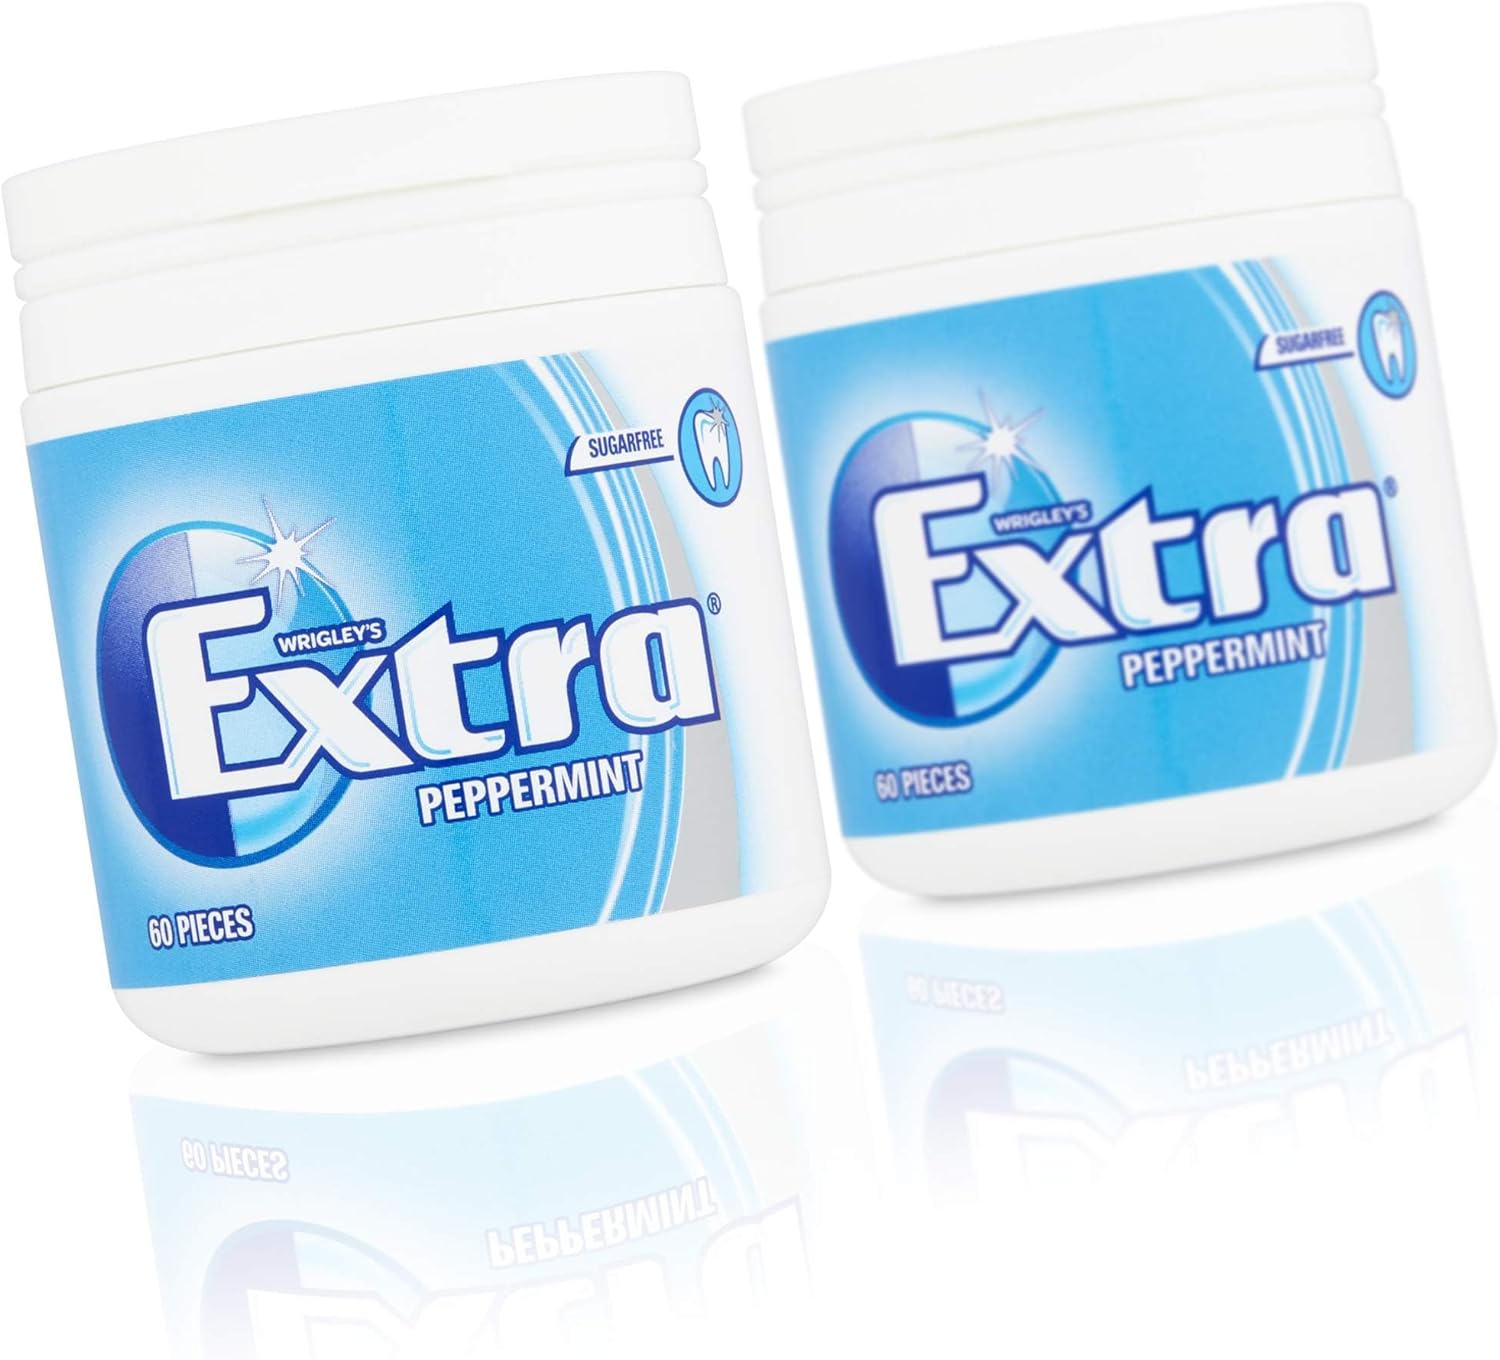 Extra White Chewing Gum Bottle, Sugar Free, Peppermint Flavour, 1 Bottle of 60 Pieces